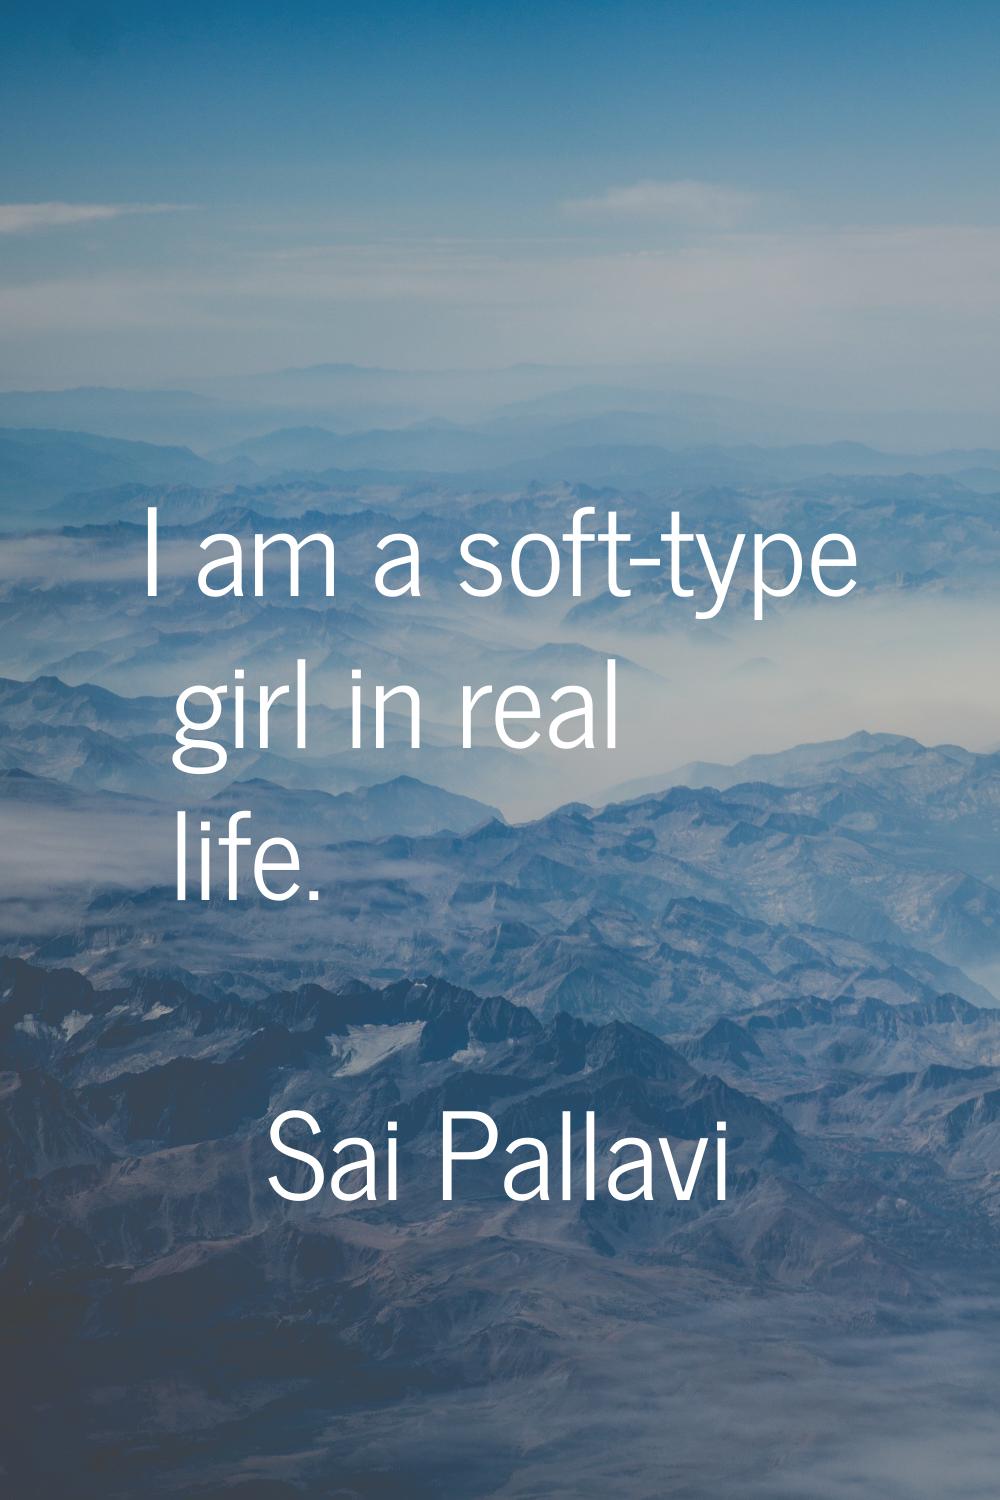 I am a soft-type girl in real life.